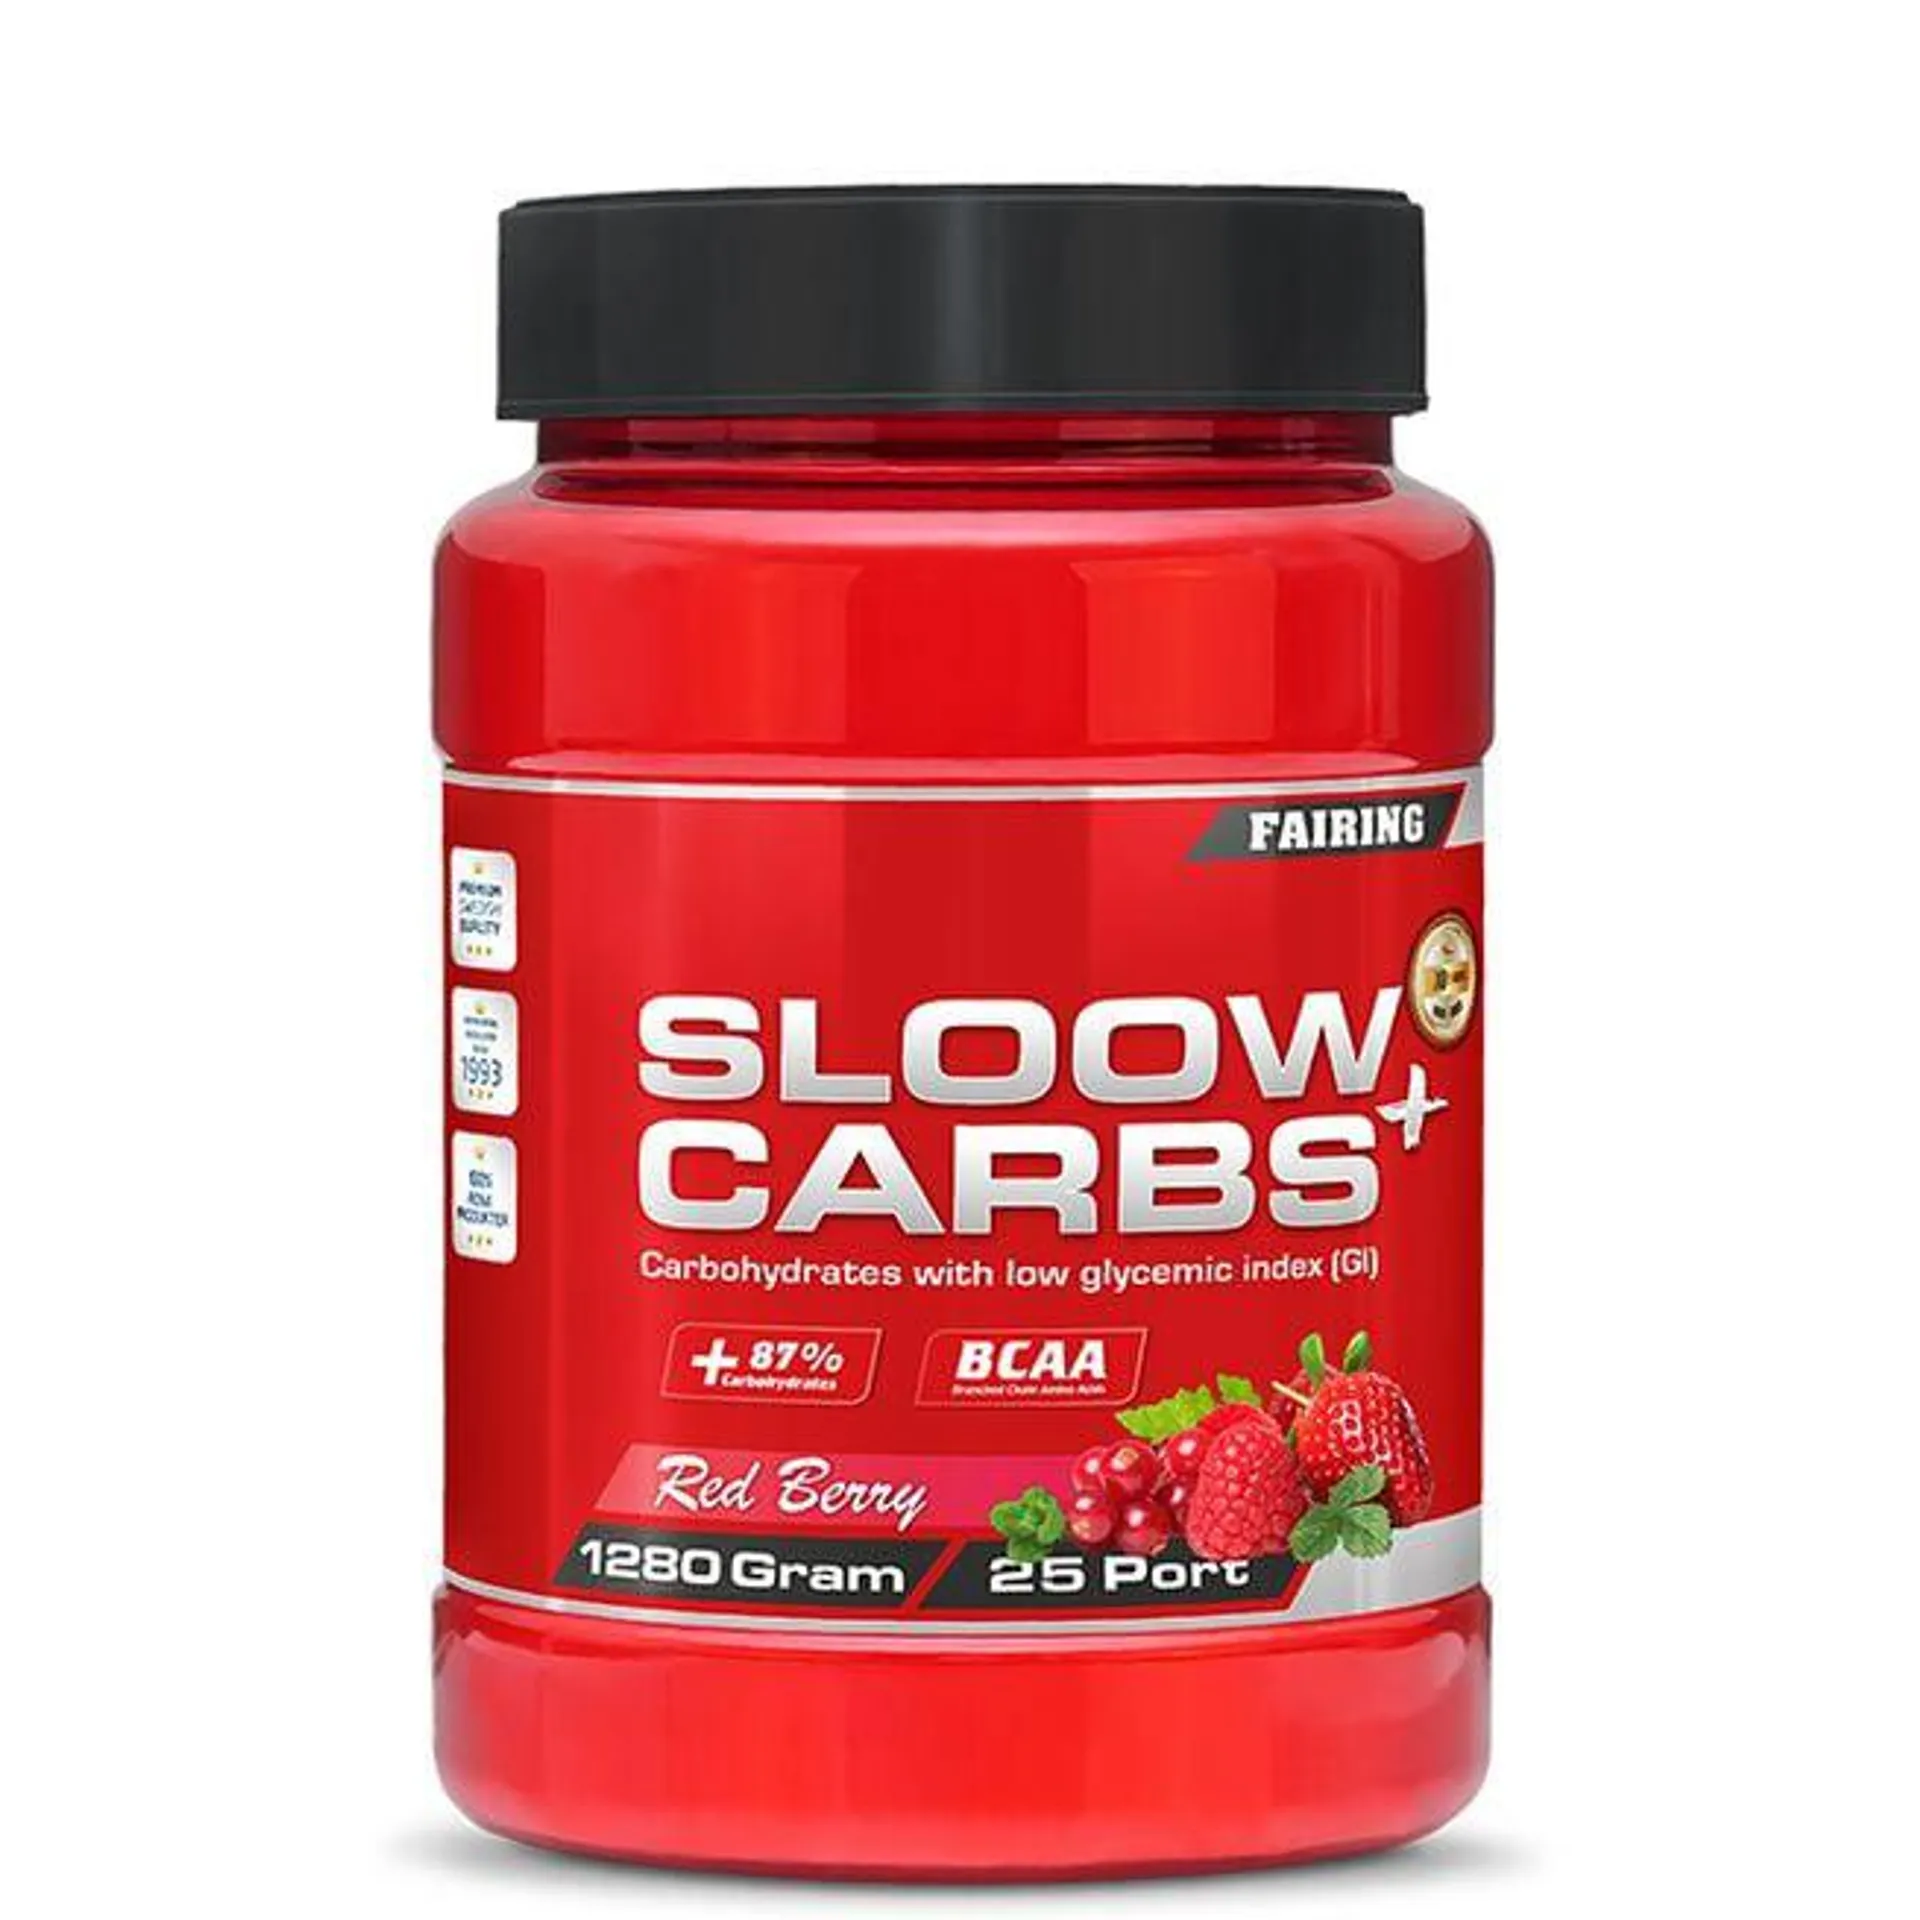 Sloow Carbs +, 1280 g Red Berry